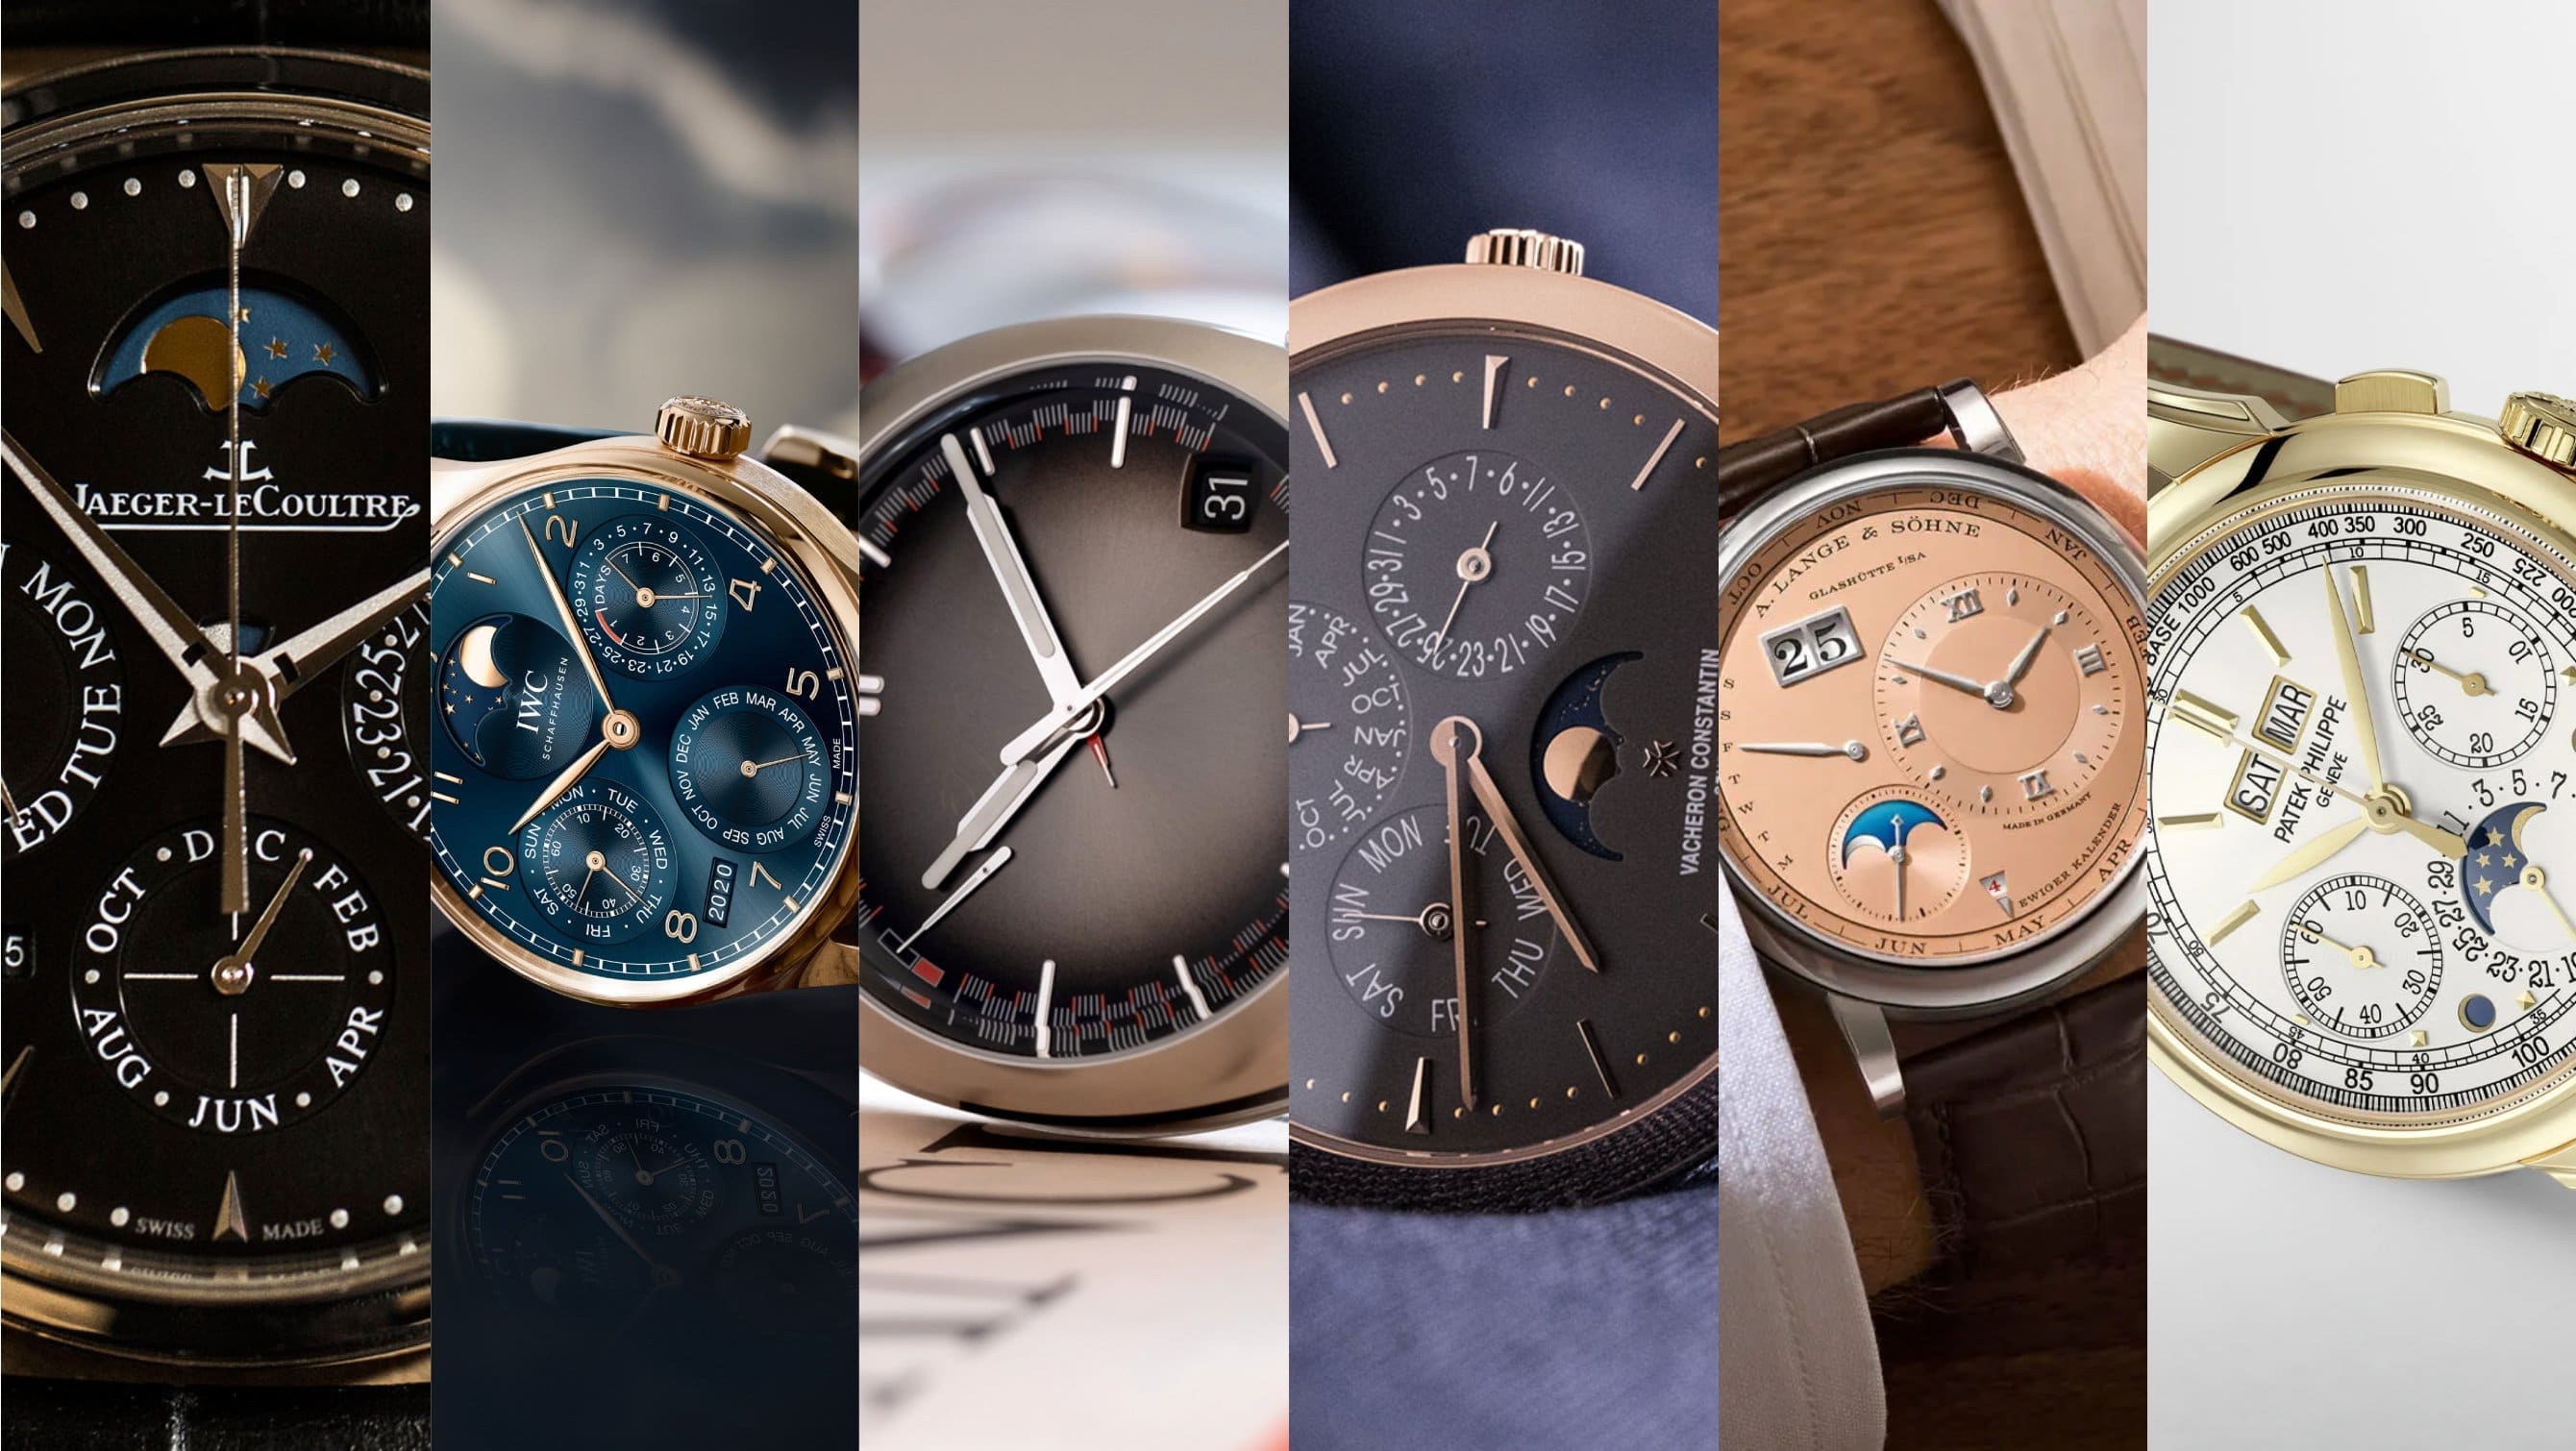 The 6 best perpetual calendar watches